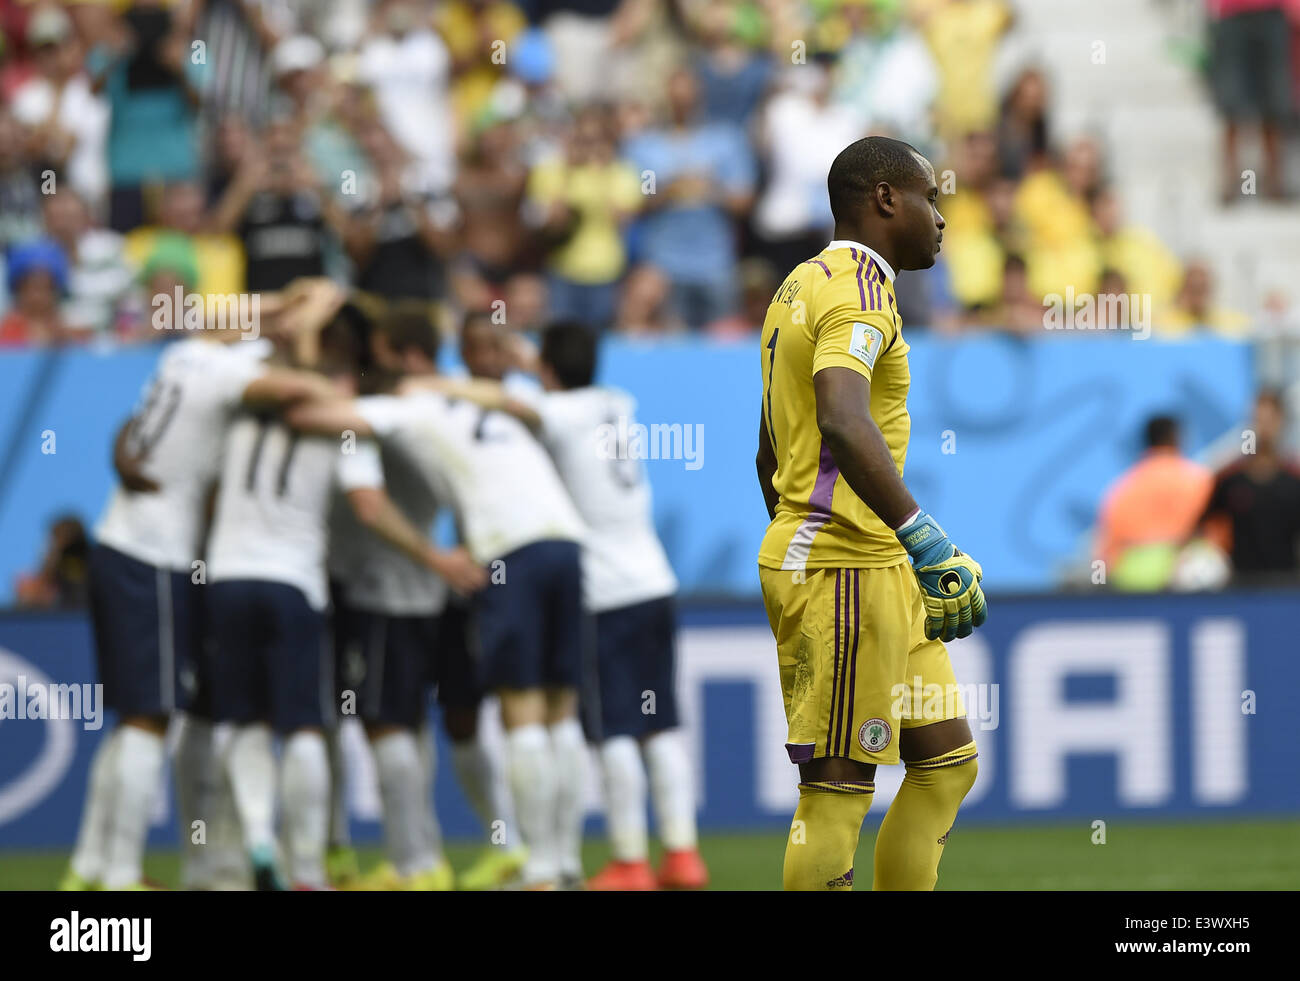 Brasilia, Brazil. 30th June, 2014. Nigeria's goalkeeper Vincent Enyeama reacts during a Round of 16 match between France and Nigeria of 2014 FIFA World Cup at the Estadio Nacional Stadium in Brasilia, Brazil, on June 30, 2014. France won 2-0 over Nigeria and qualified for quarter-finals here on Monday. Credit:  Qi Heng/Xinhua/Alamy Live News Stock Photo